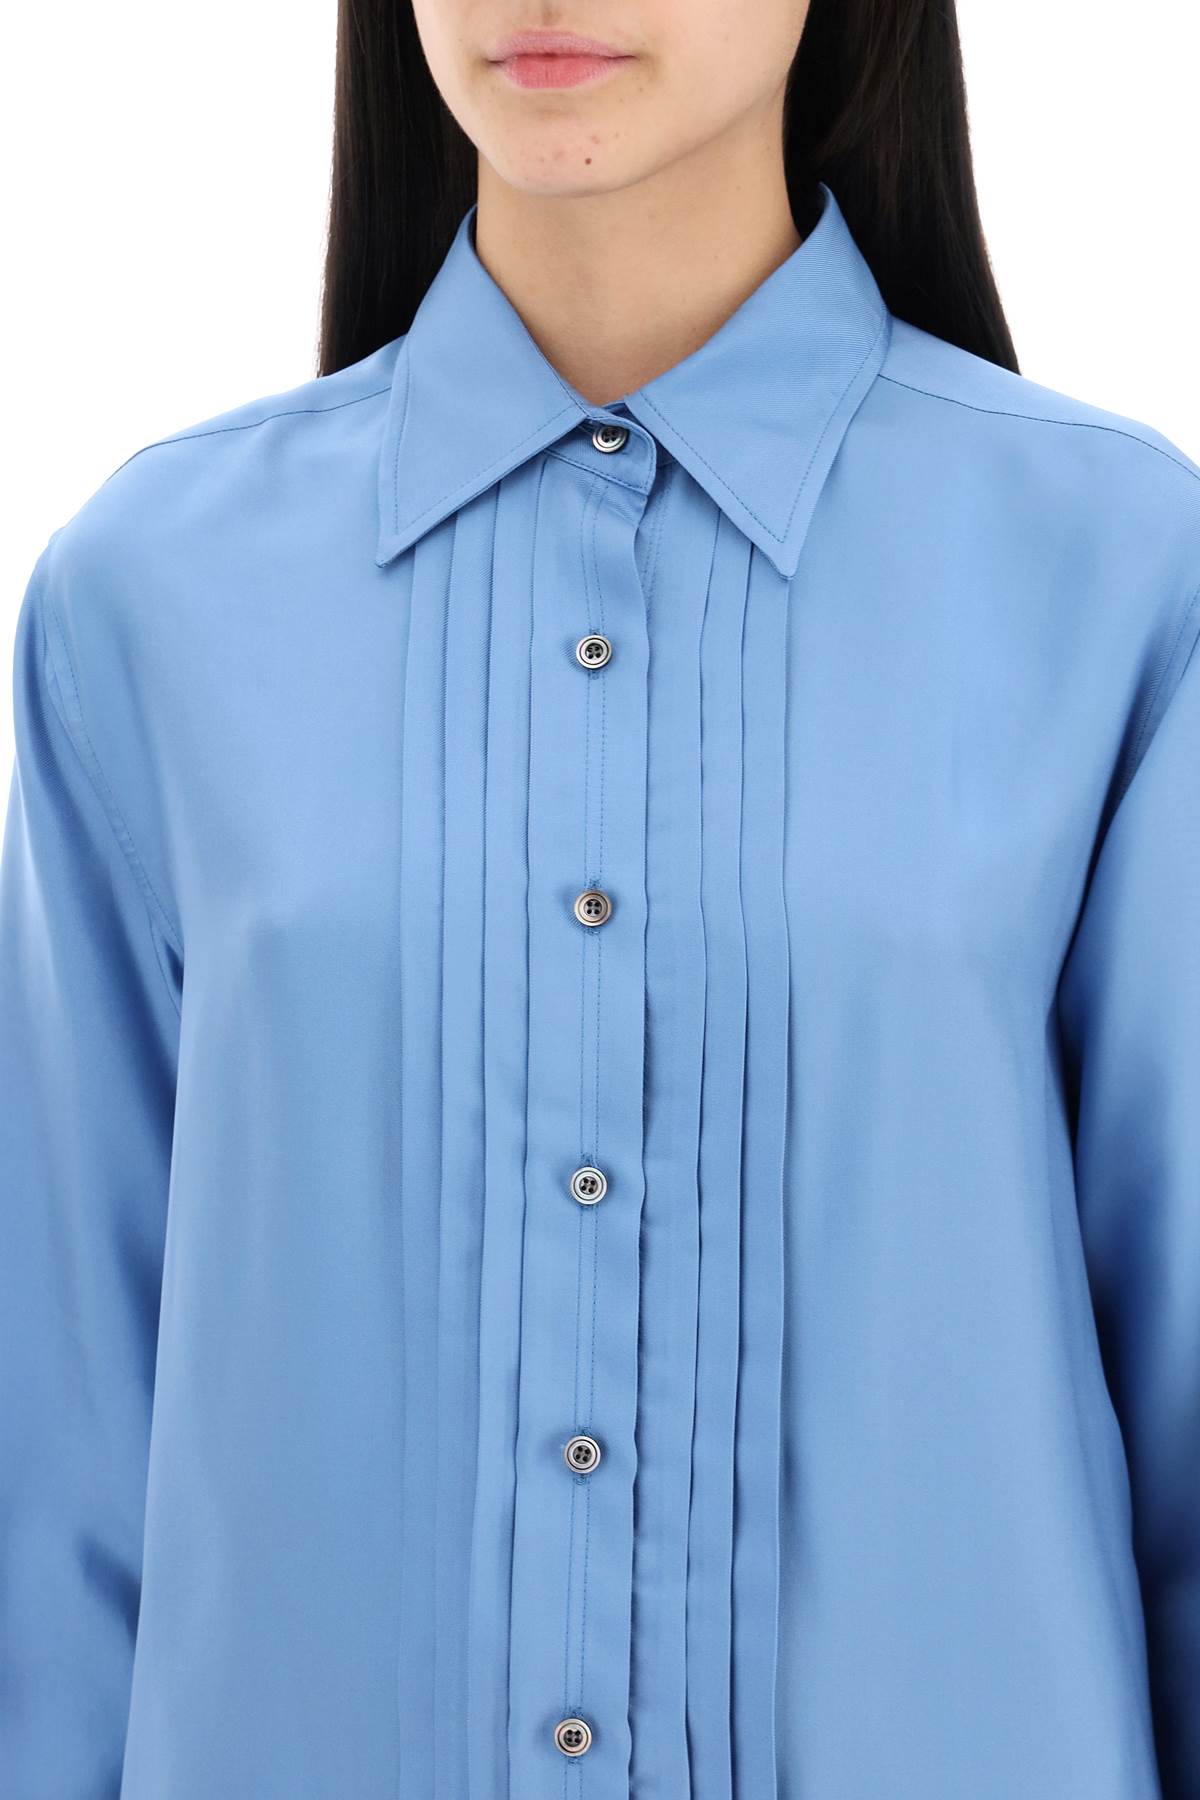 Tom ford pleated bib shirt with-3